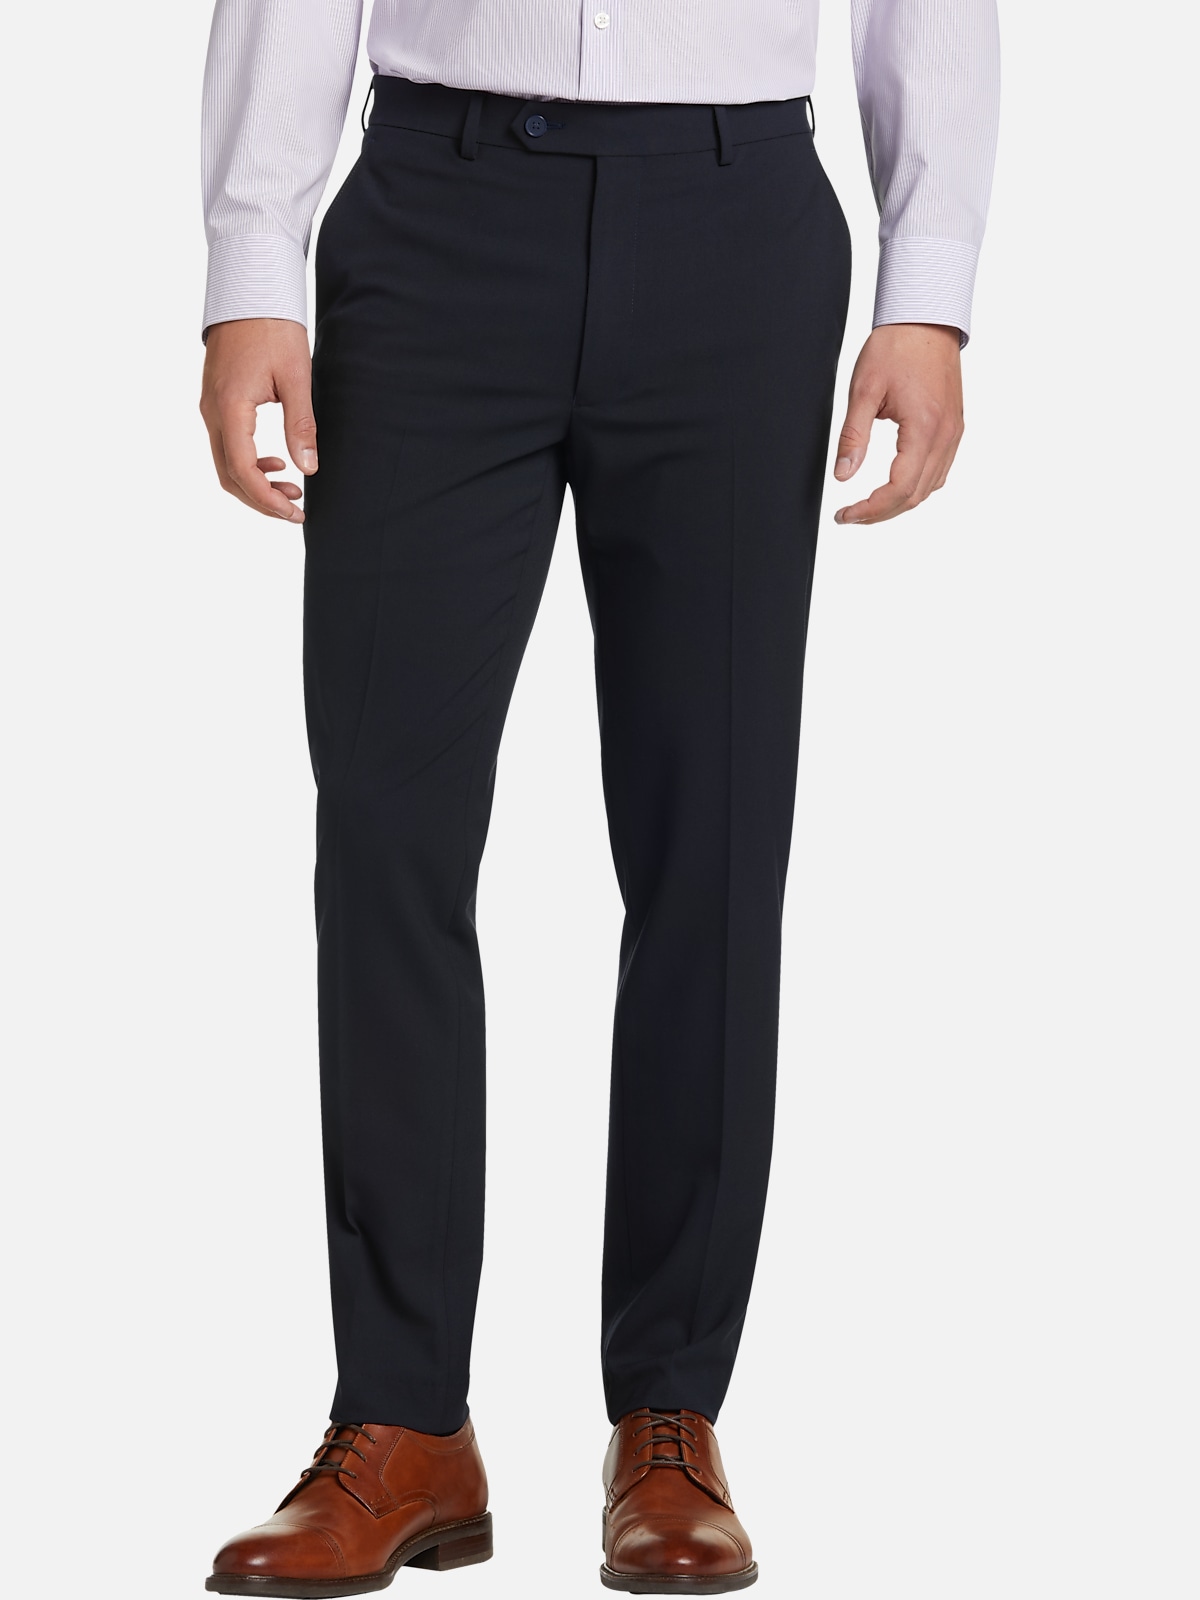 Calvin Klein Jayden Skinny Fit Stretch Dress Pant | All Clearance $39. ...